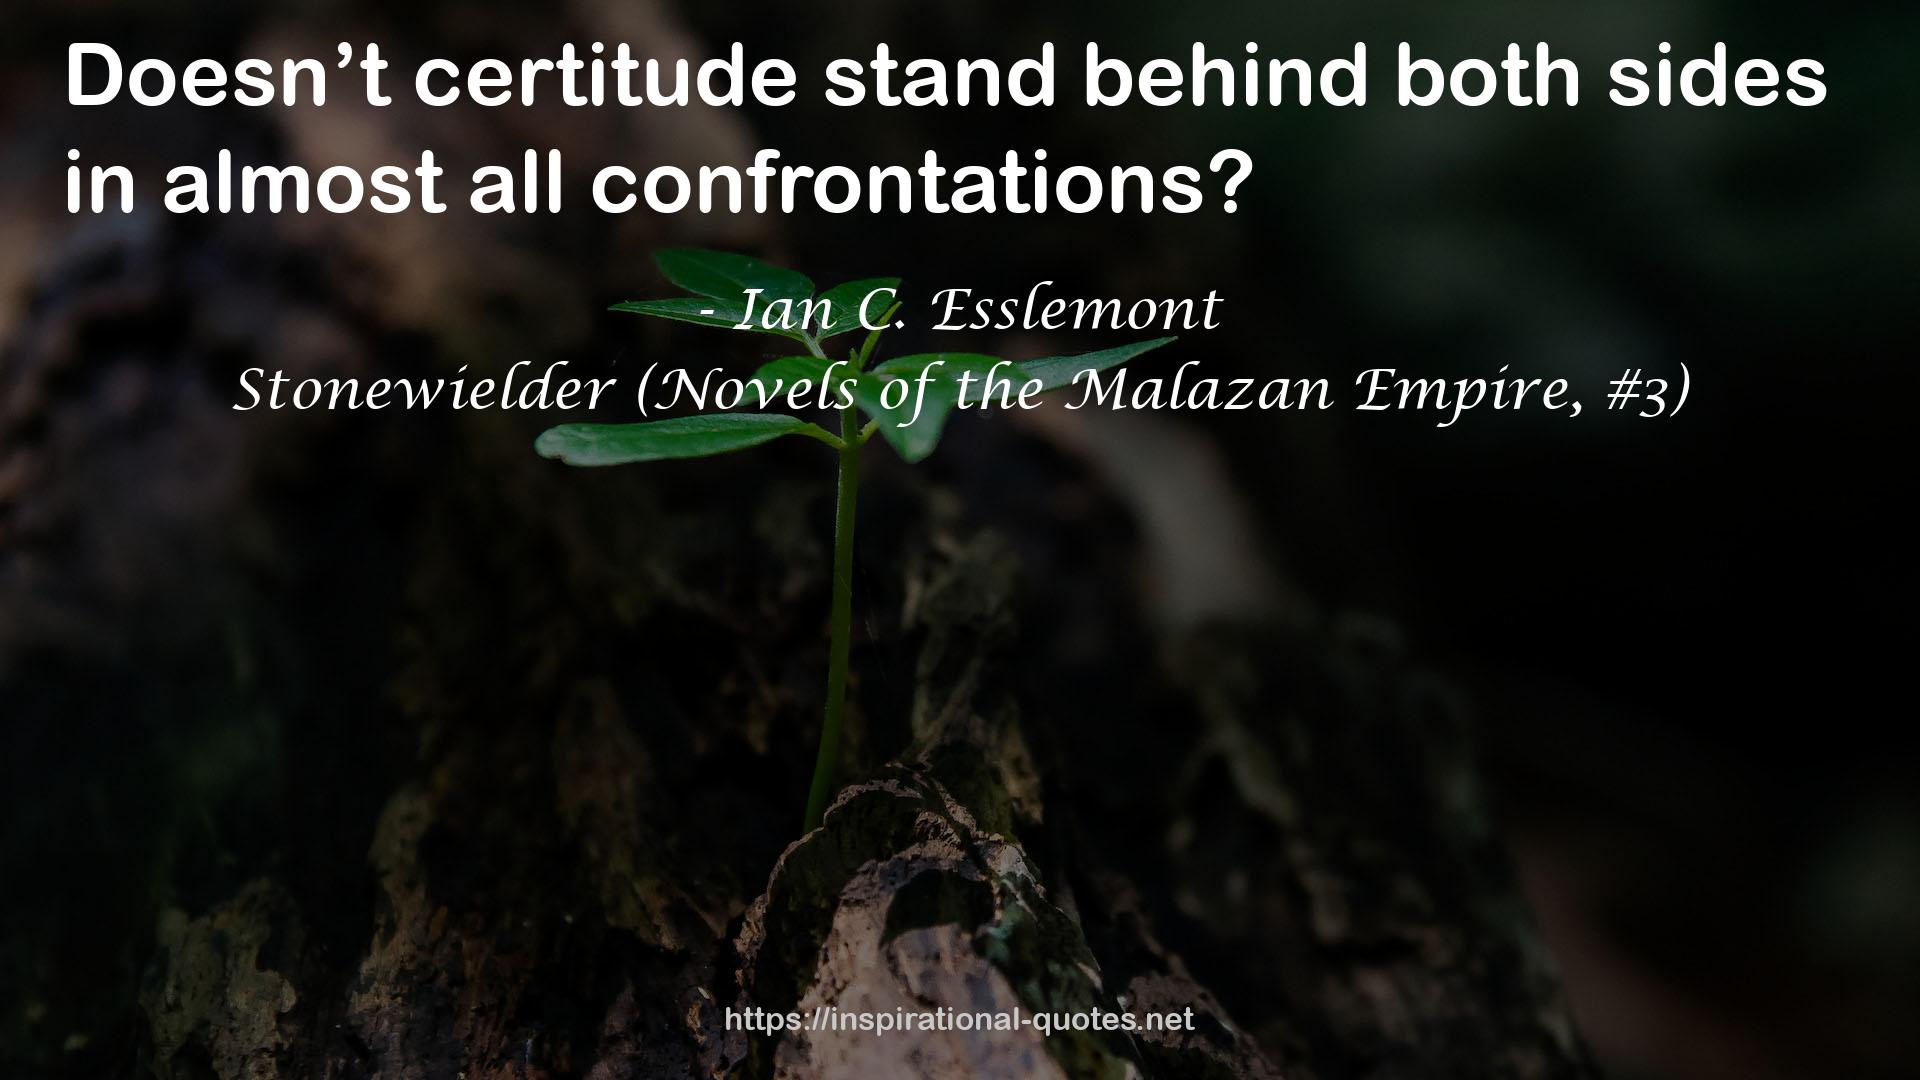 Stonewielder (Novels of the Malazan Empire, #3) QUOTES